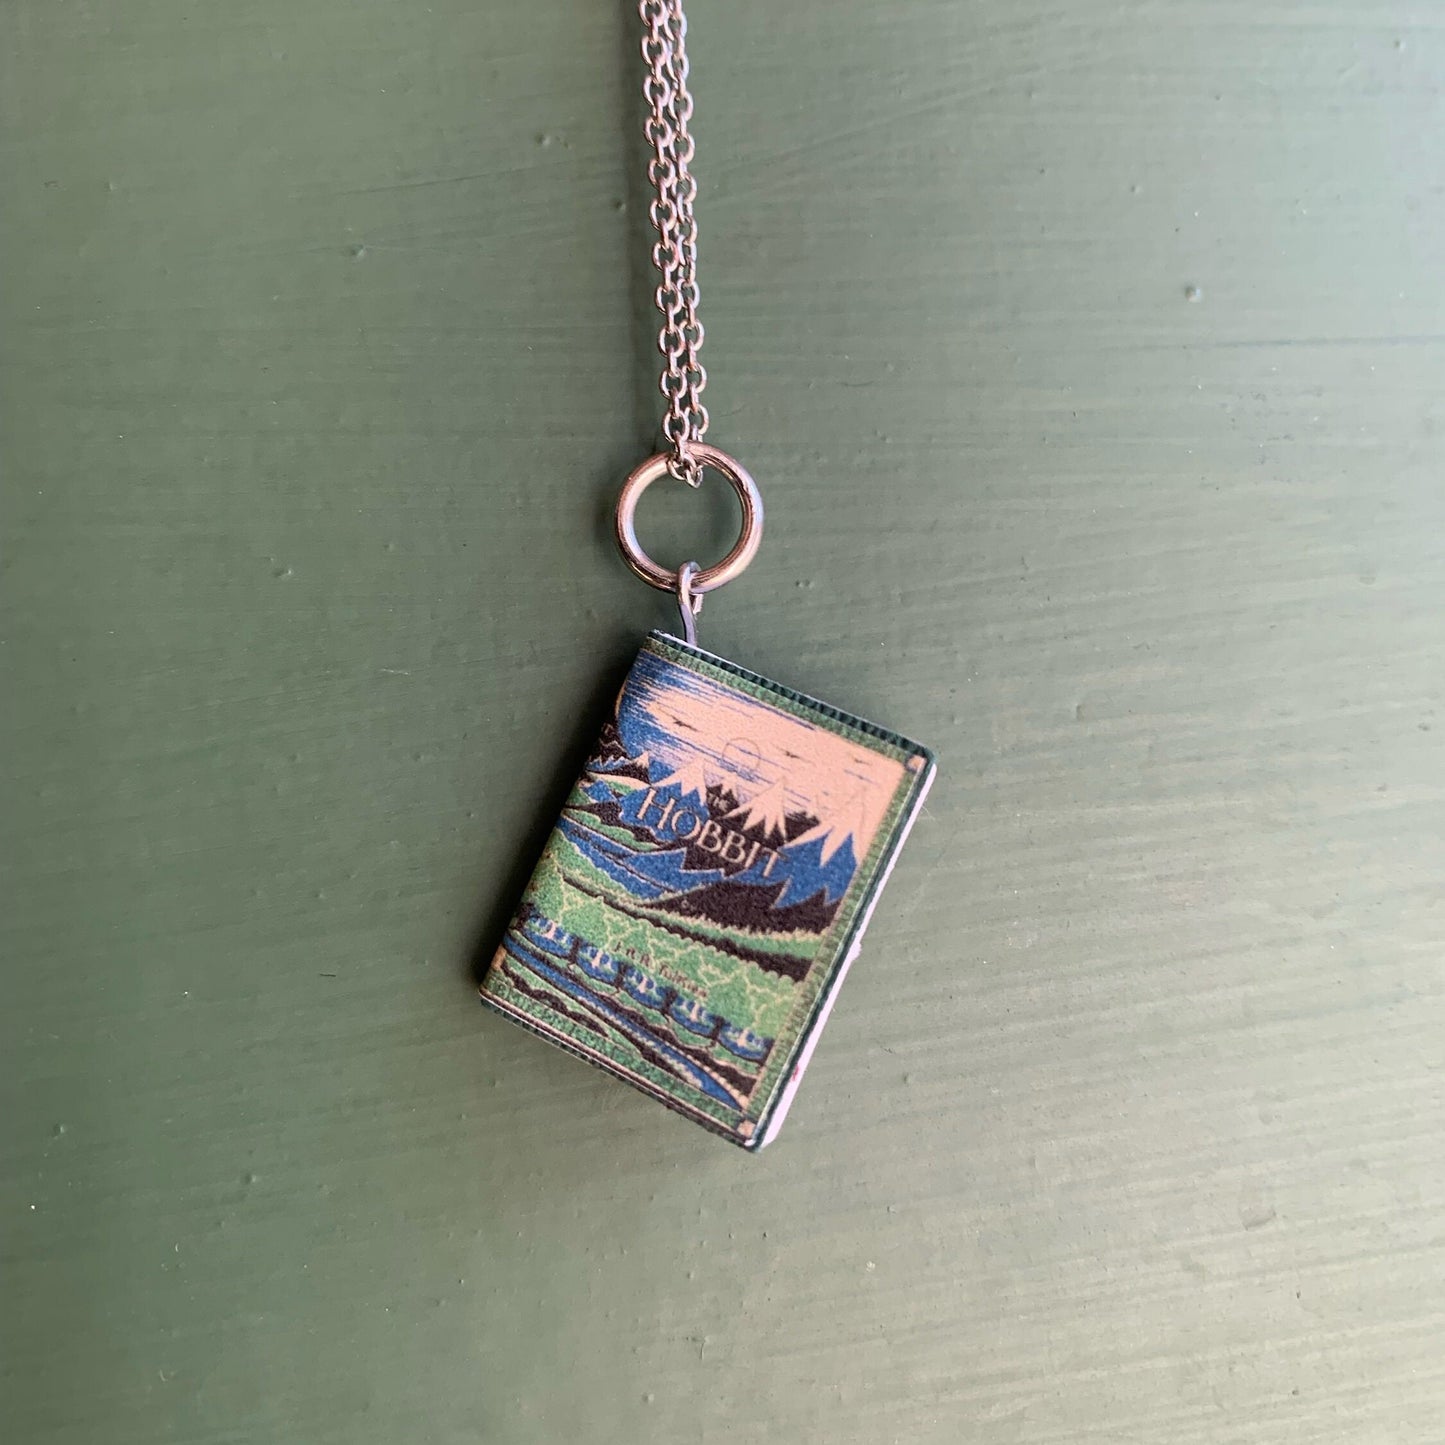 book pendant on necklace chain